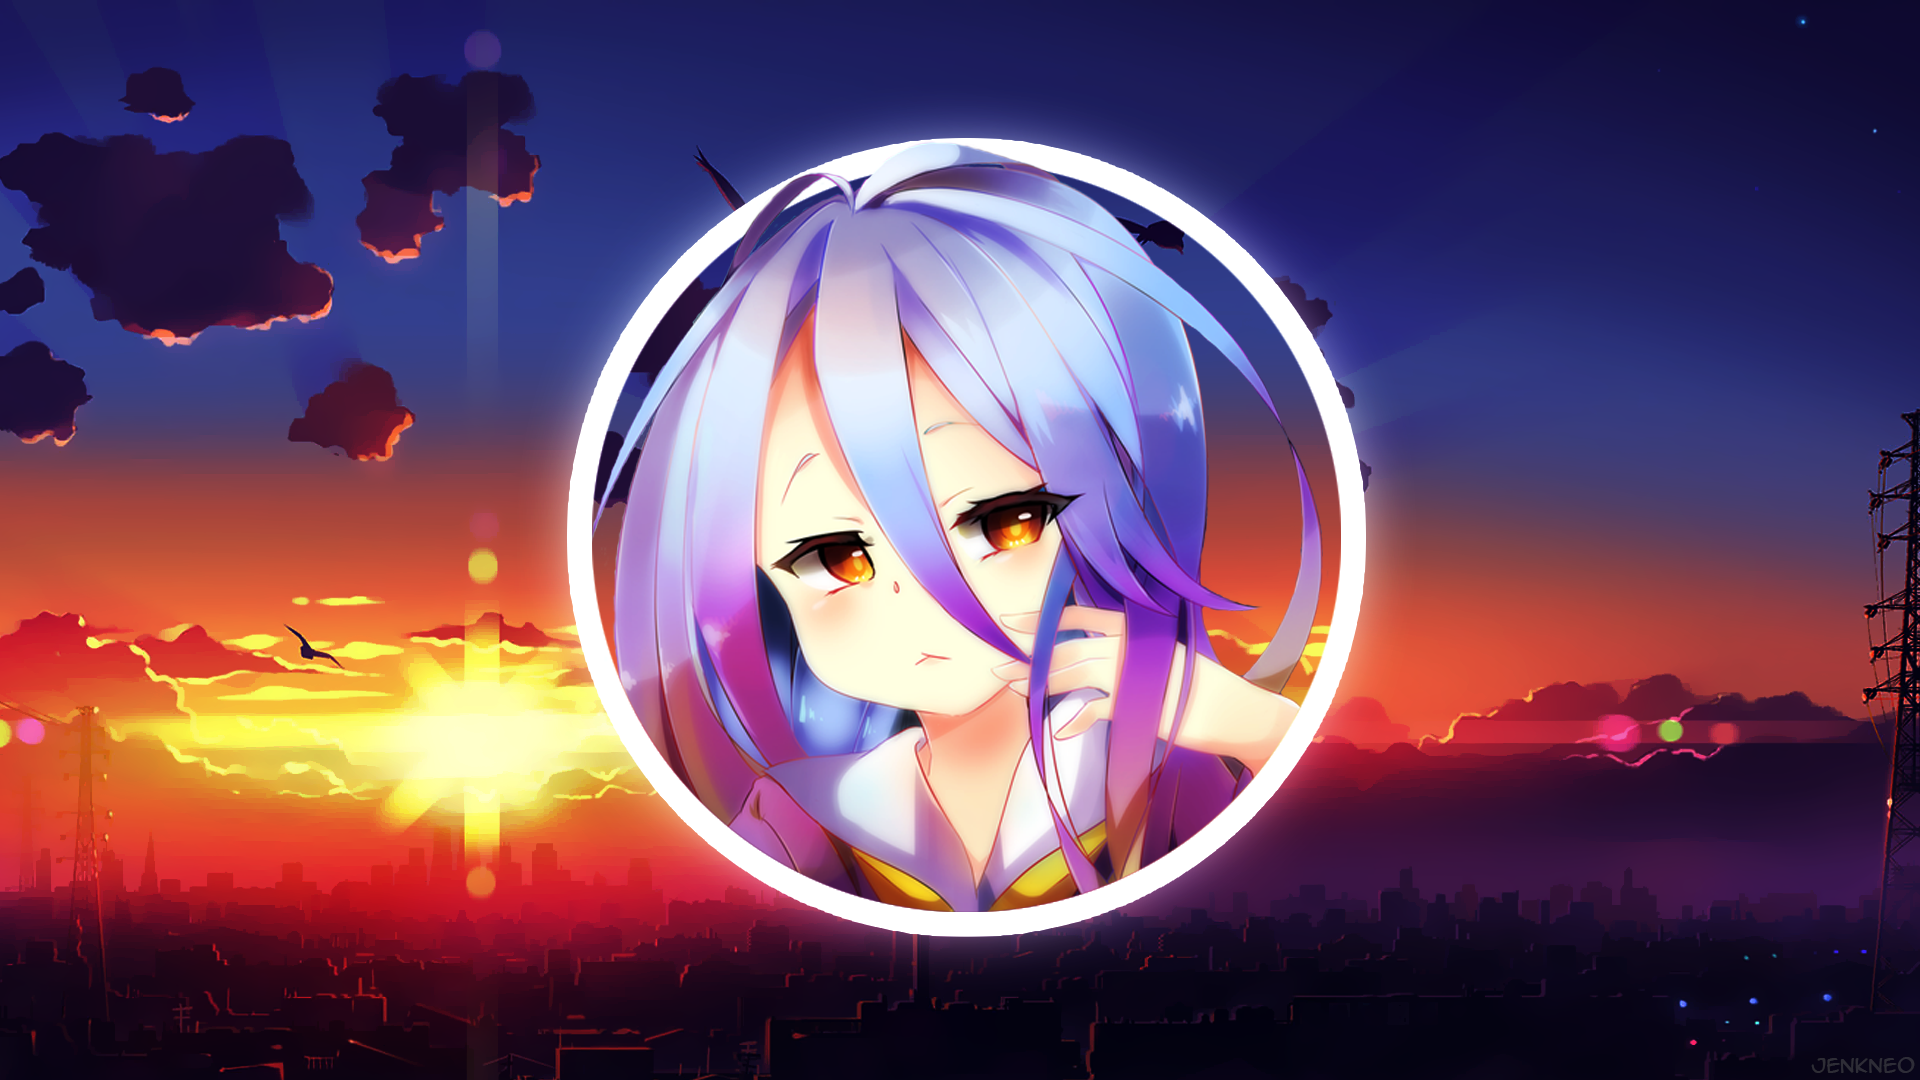 Anime Anime Girls Shiro No Game No Life No Game No Life Picture In Picture 1920x1080